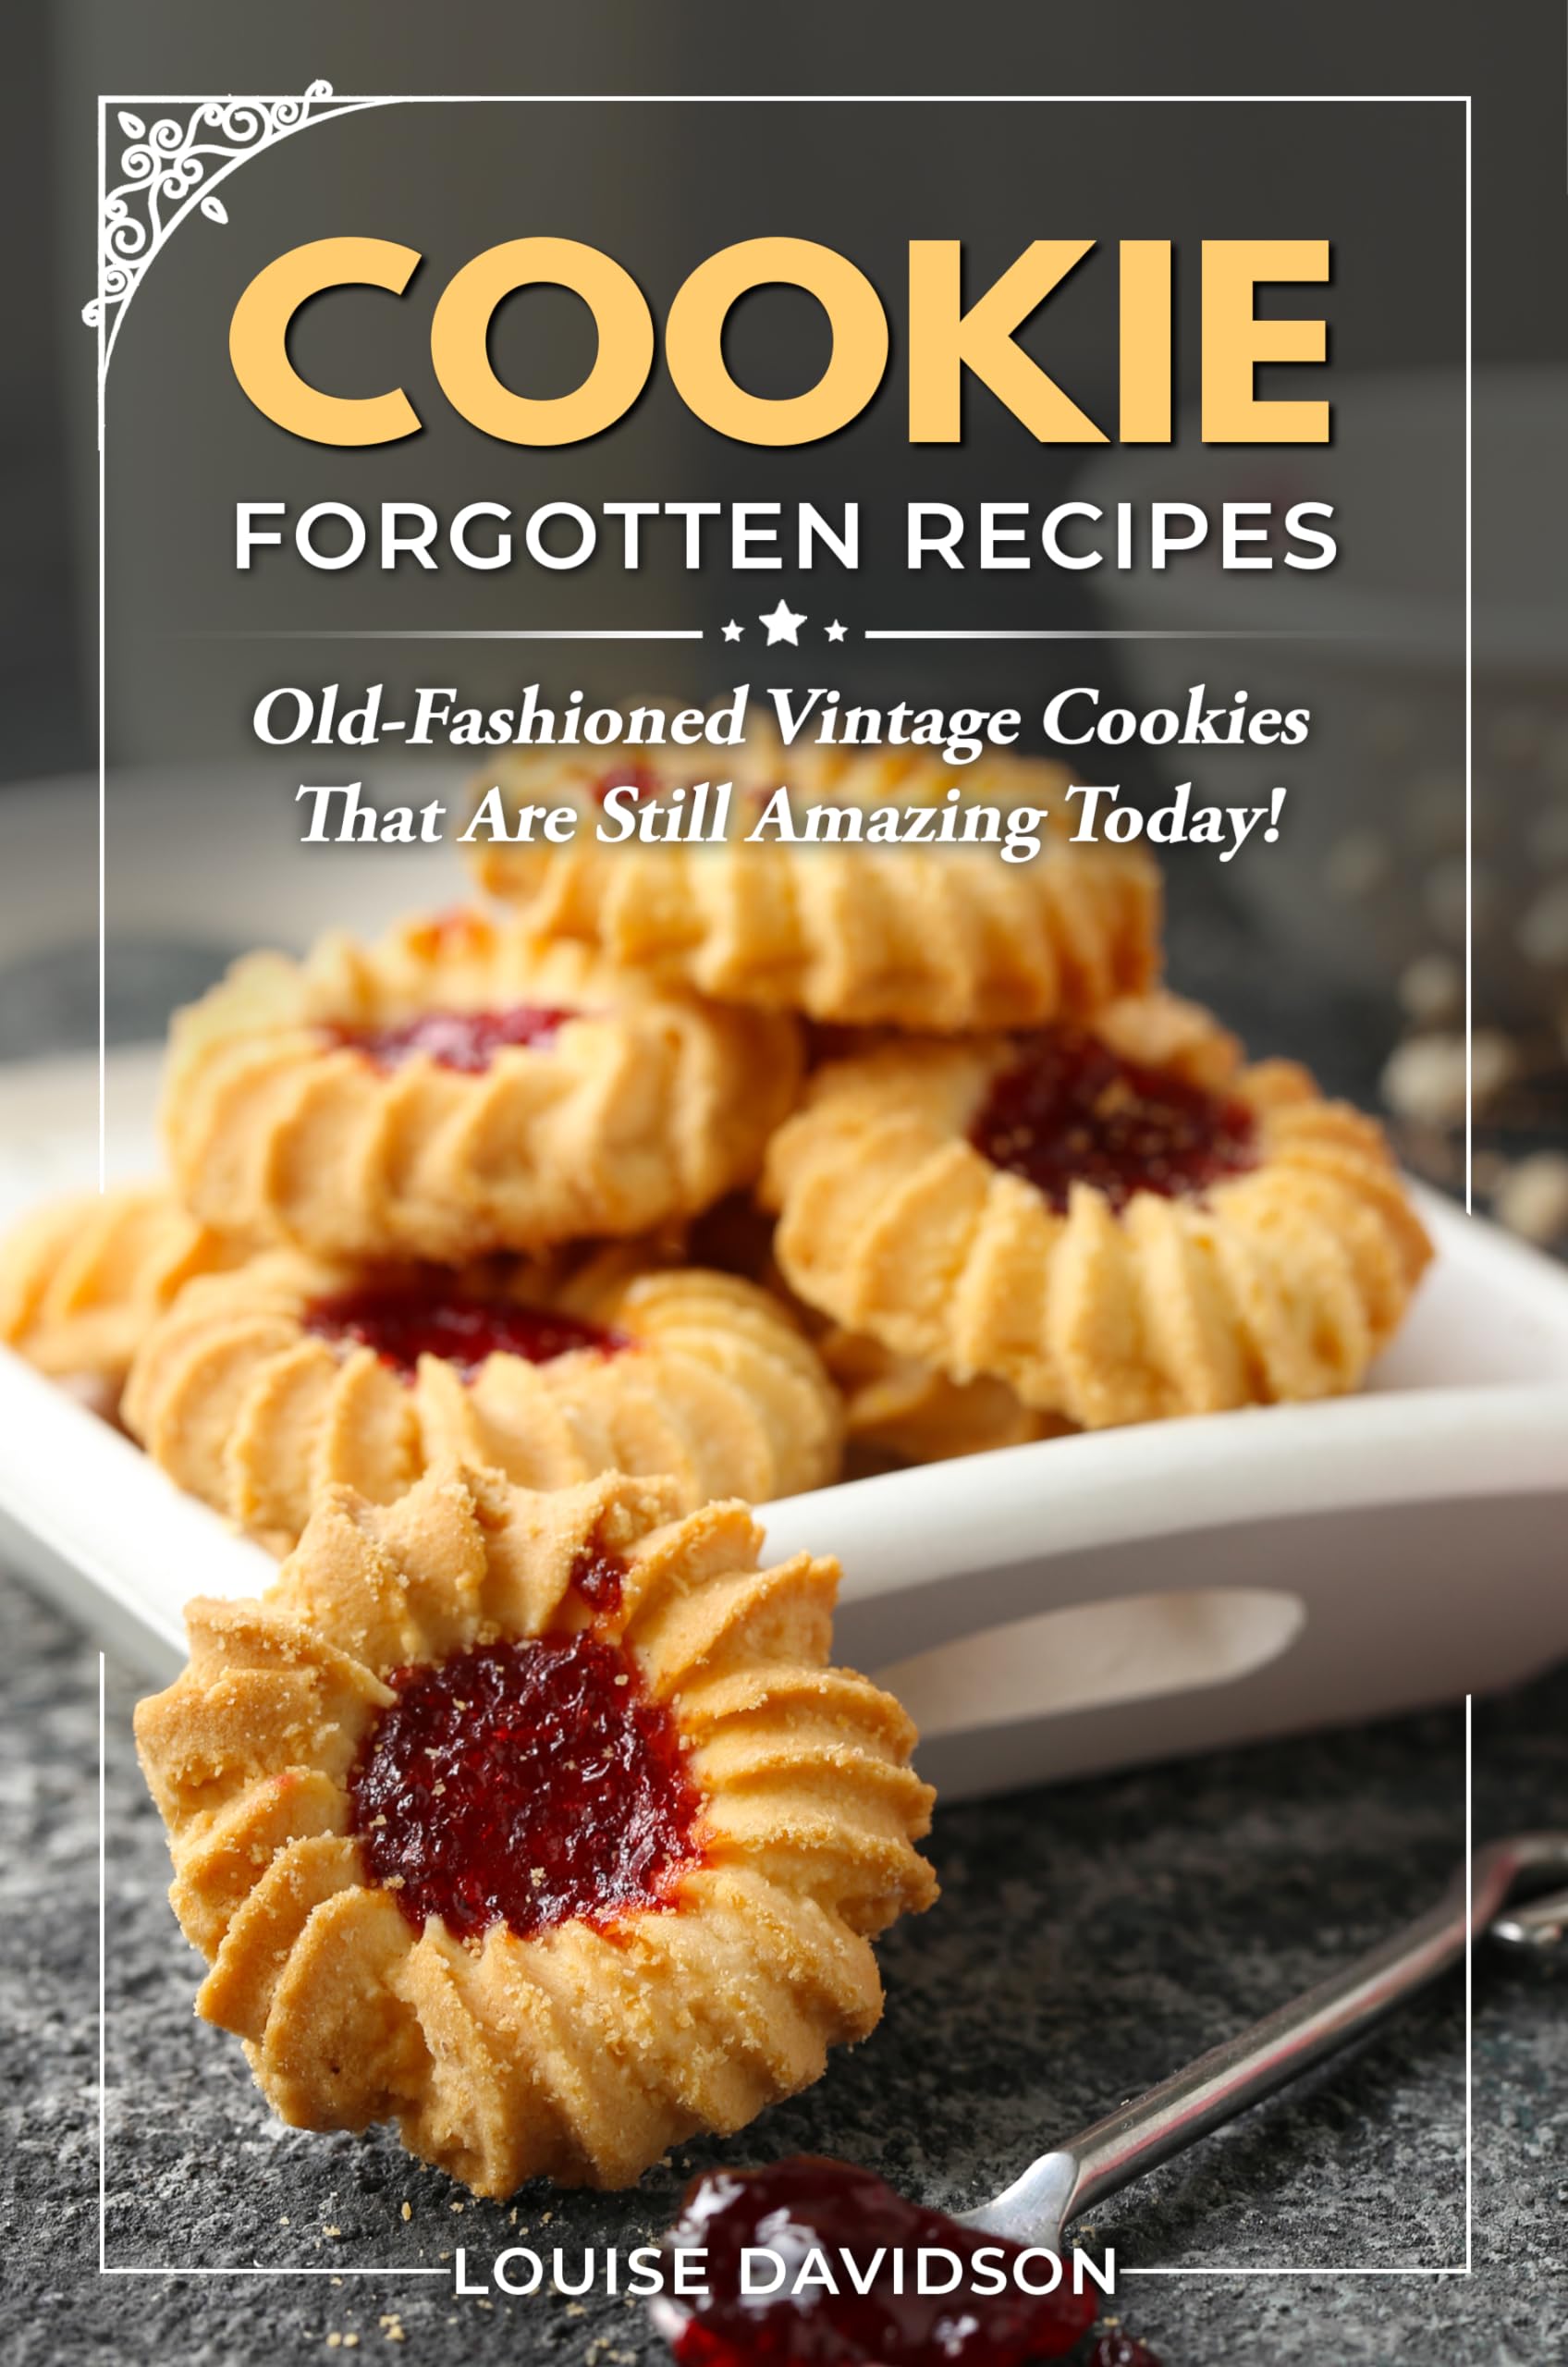 Cookie Forgotten Recipes: Old-Fashioned Vintage Cookies That Are Still Amazing Today! (Vintage Recipe Cookbooks Book 6)